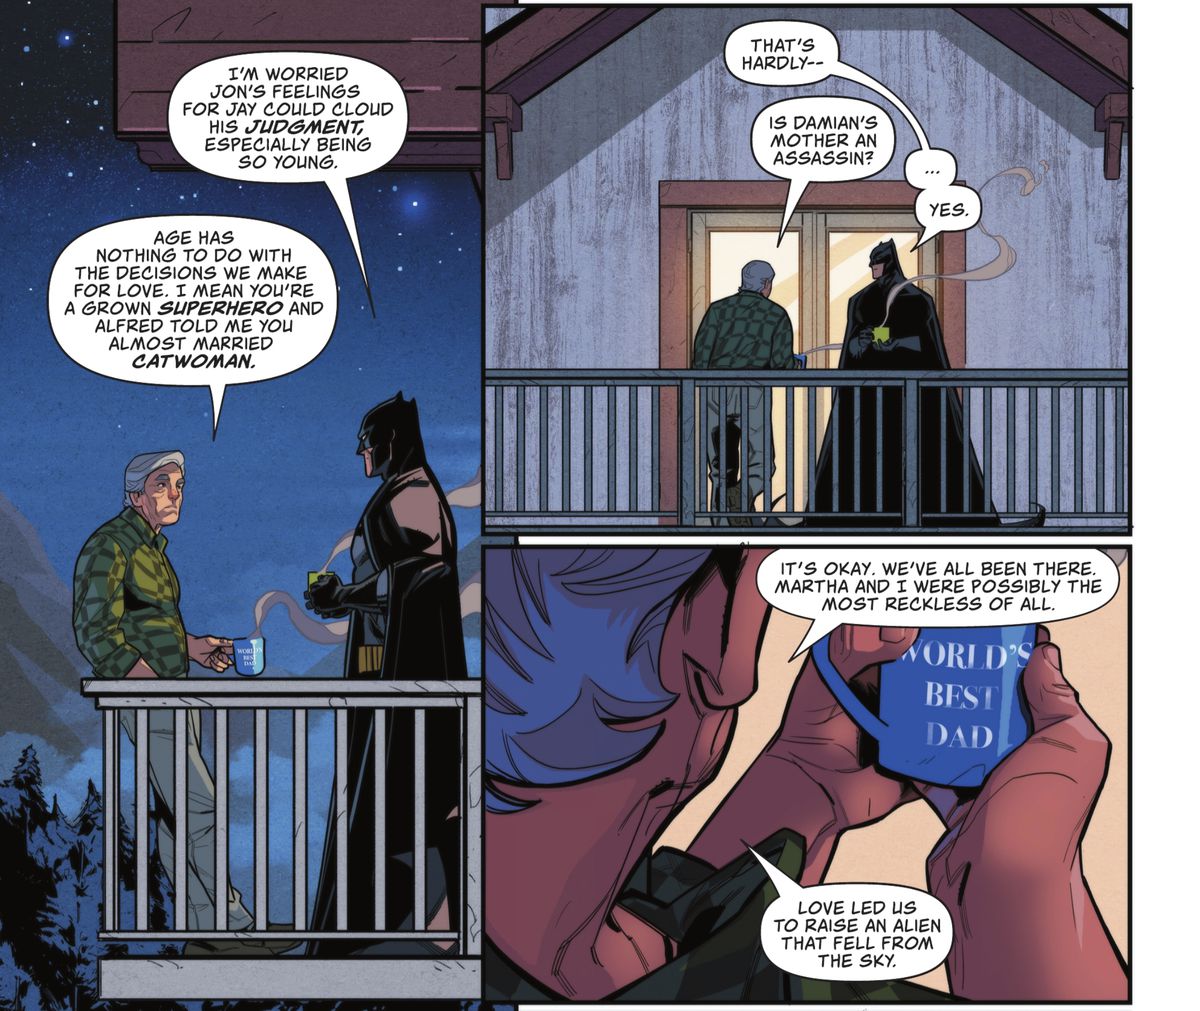 “You’re a grown superhero and Alfred told me you almost married Catwoman,” Jonathan Kent tells Batman over coffee on a balcony. “That’s hardly,” Batman protests. “Is Damian’s mother an assassin?” Jonathan interrupts. Batman pauses, awkwardly, before saying “Yes,” in Superman: Son of Kal-El #11 (2022). 